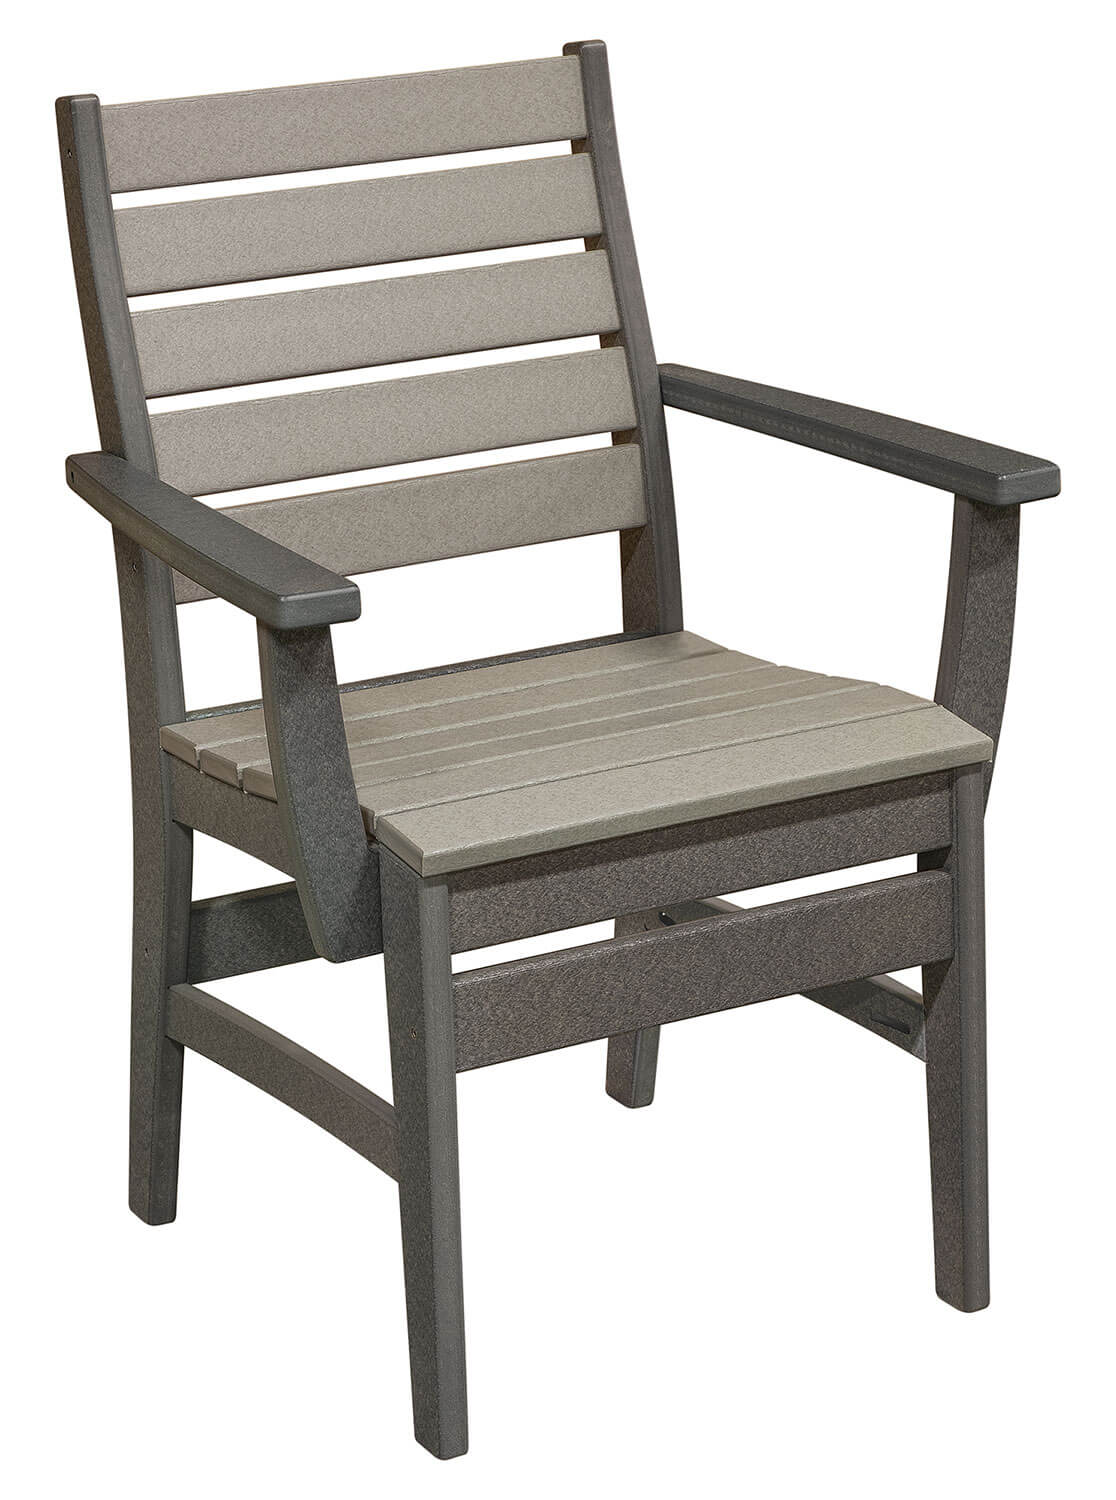 EC Woods Freeport Outdoor Poly Dining Height Chair shown in Light Gray and Dark Gray